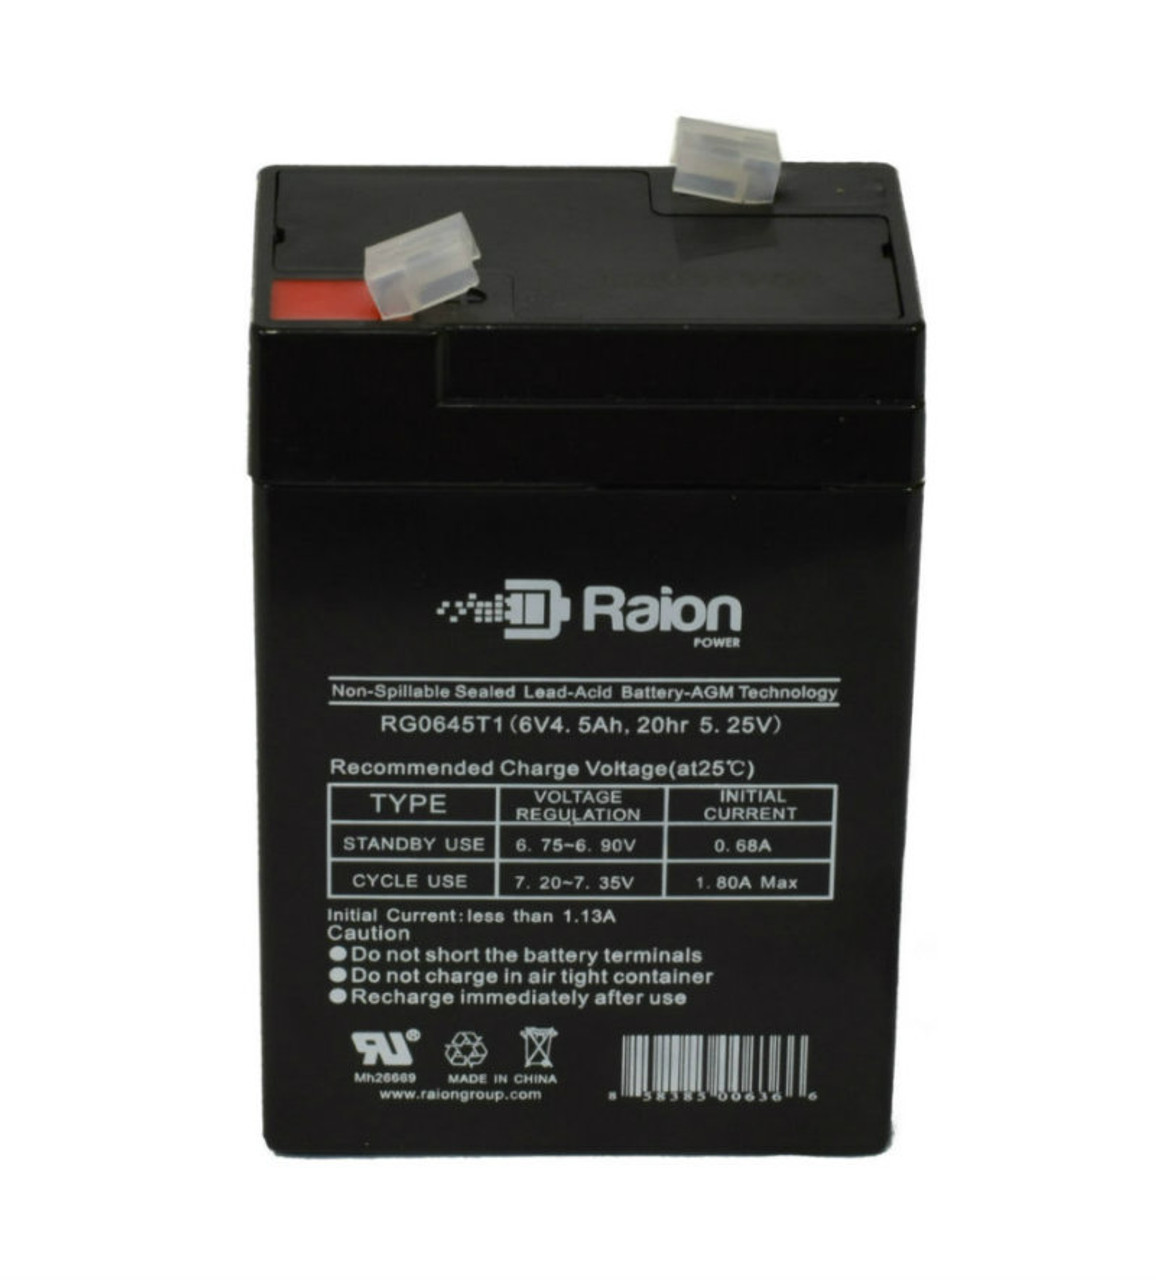 Raion Power RG0645T1 Replacement Battery Cartridge for VCELL 6VC4.5